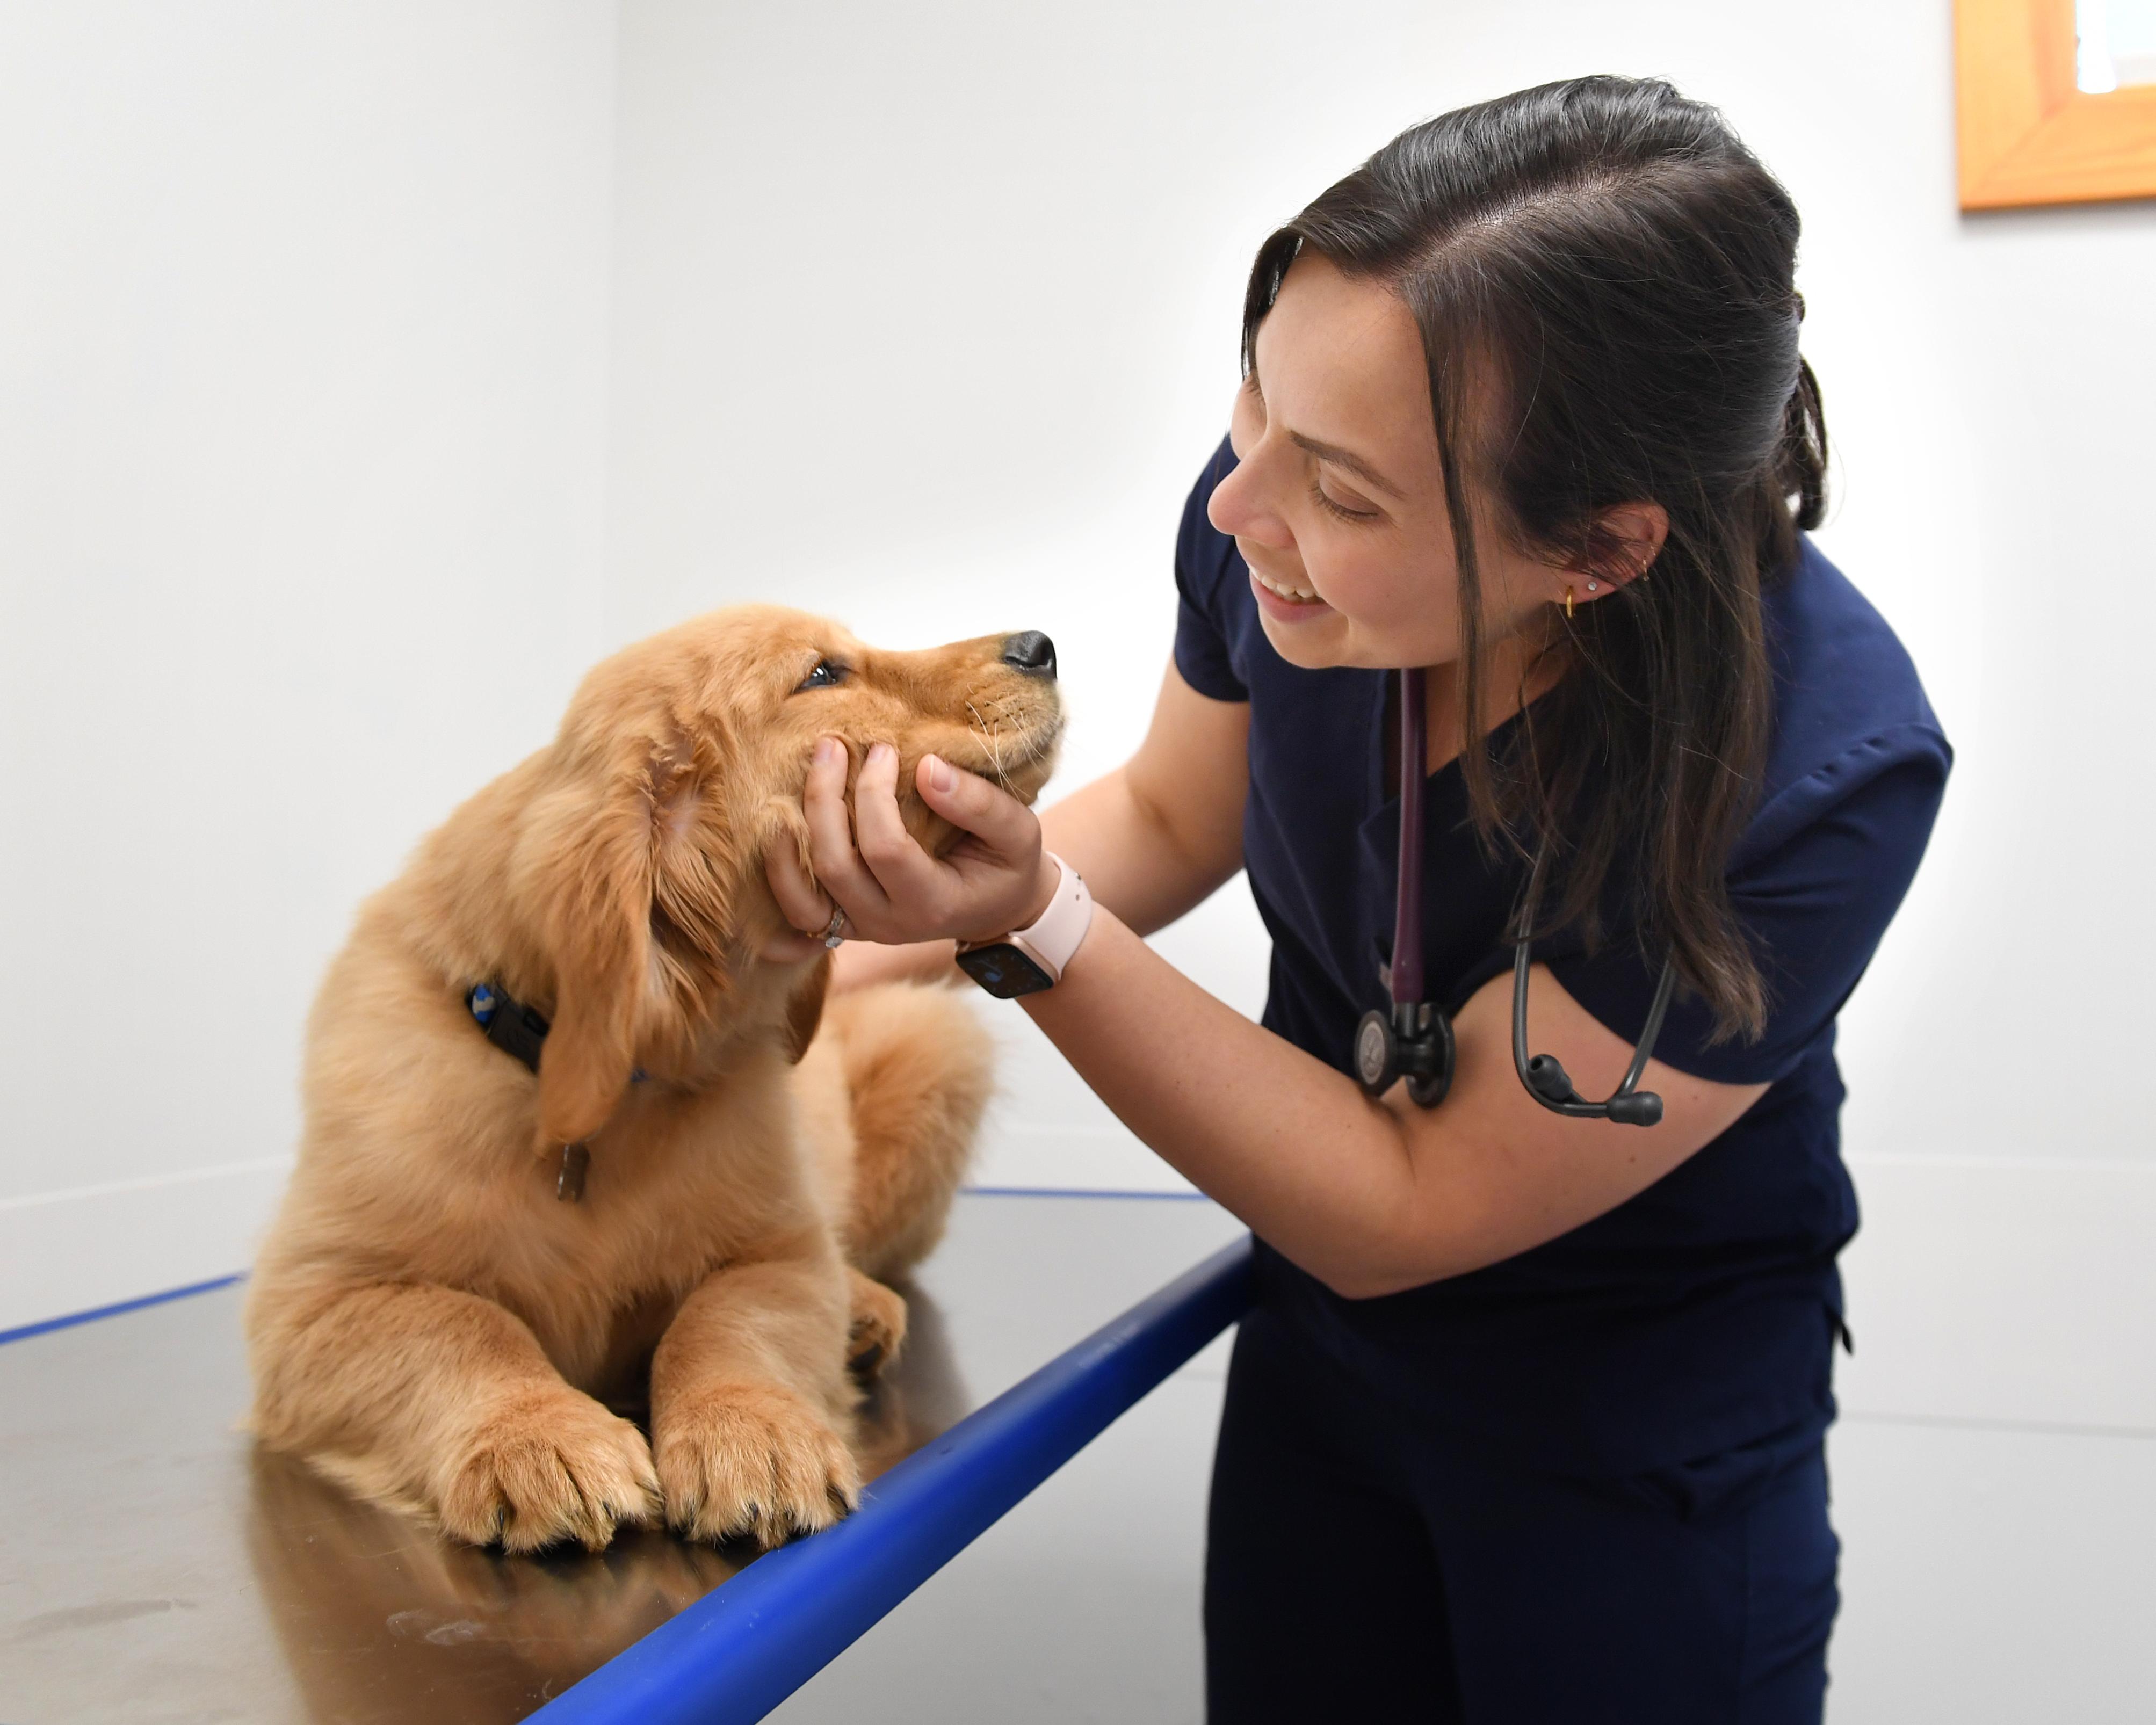 Veterinarian attending to a dog